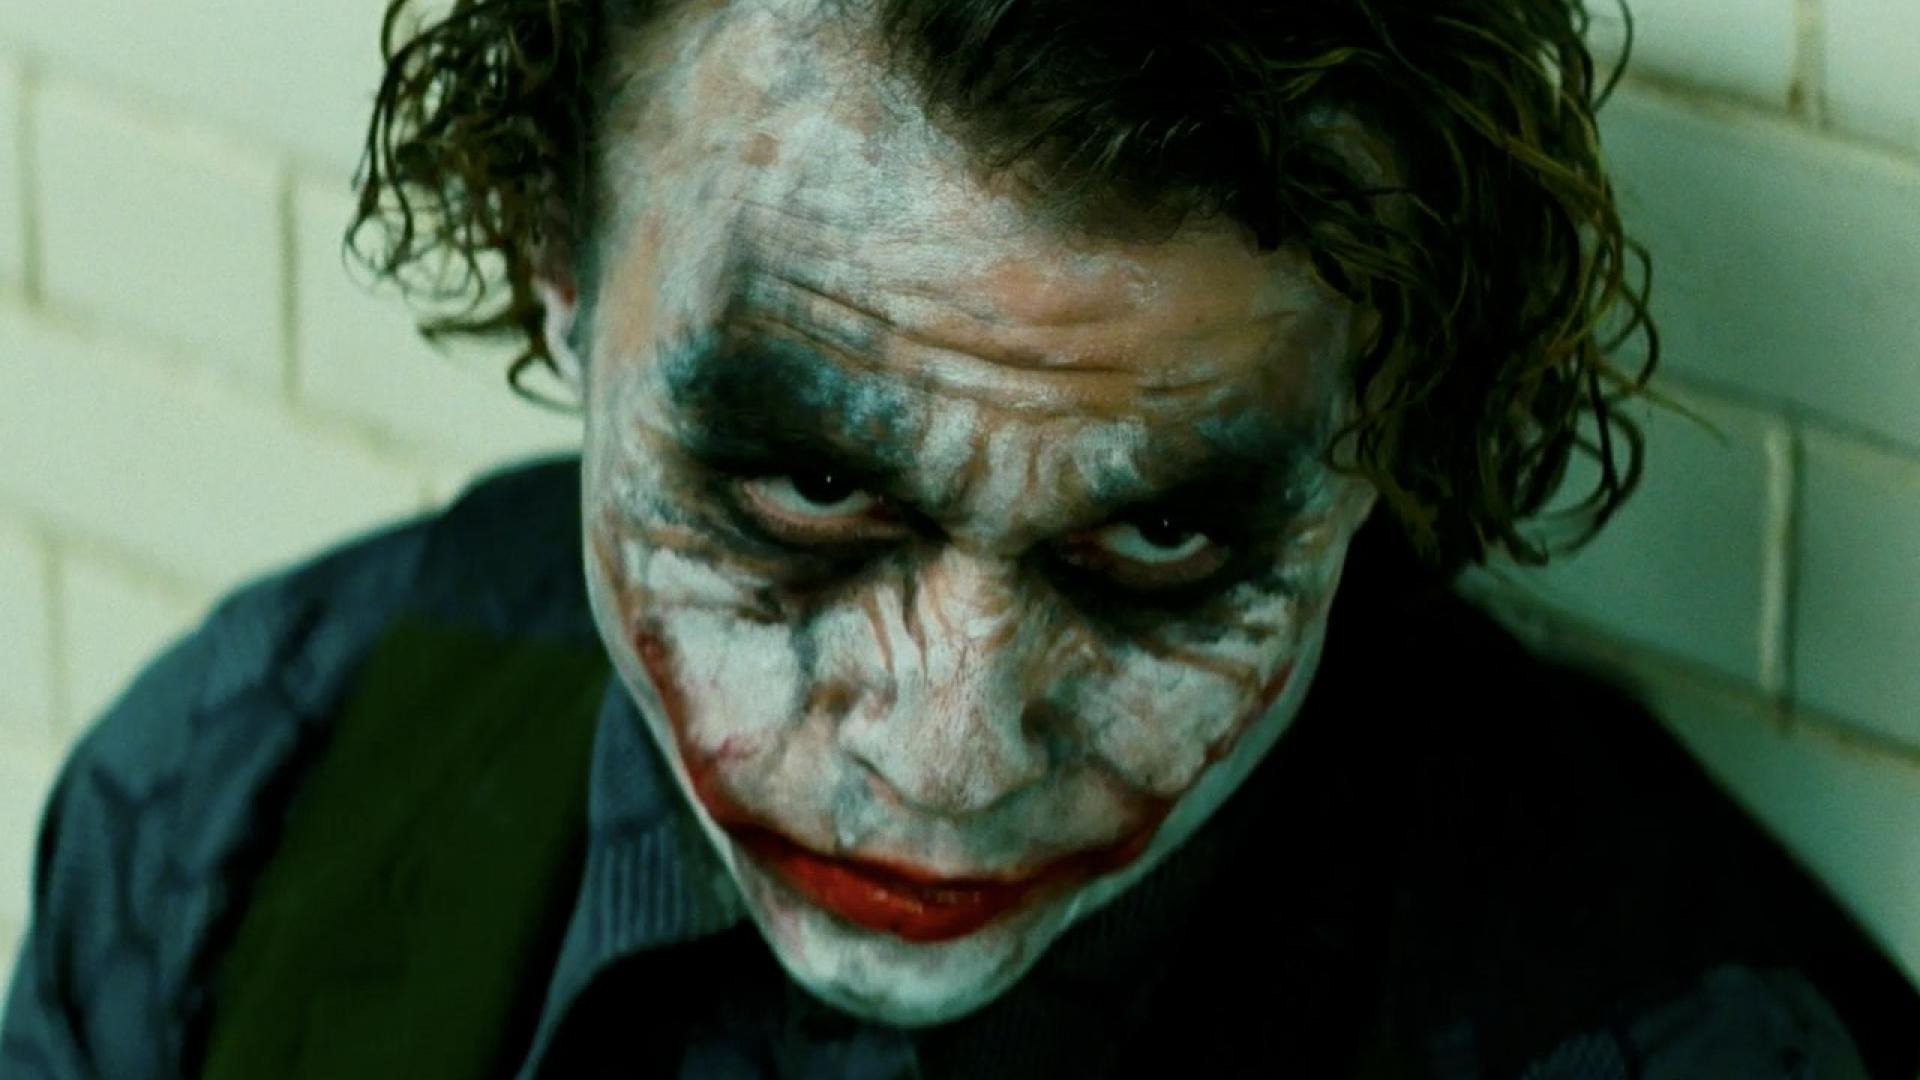 10 Things You Didn't Know About Heath Ledger's 'The Joker'